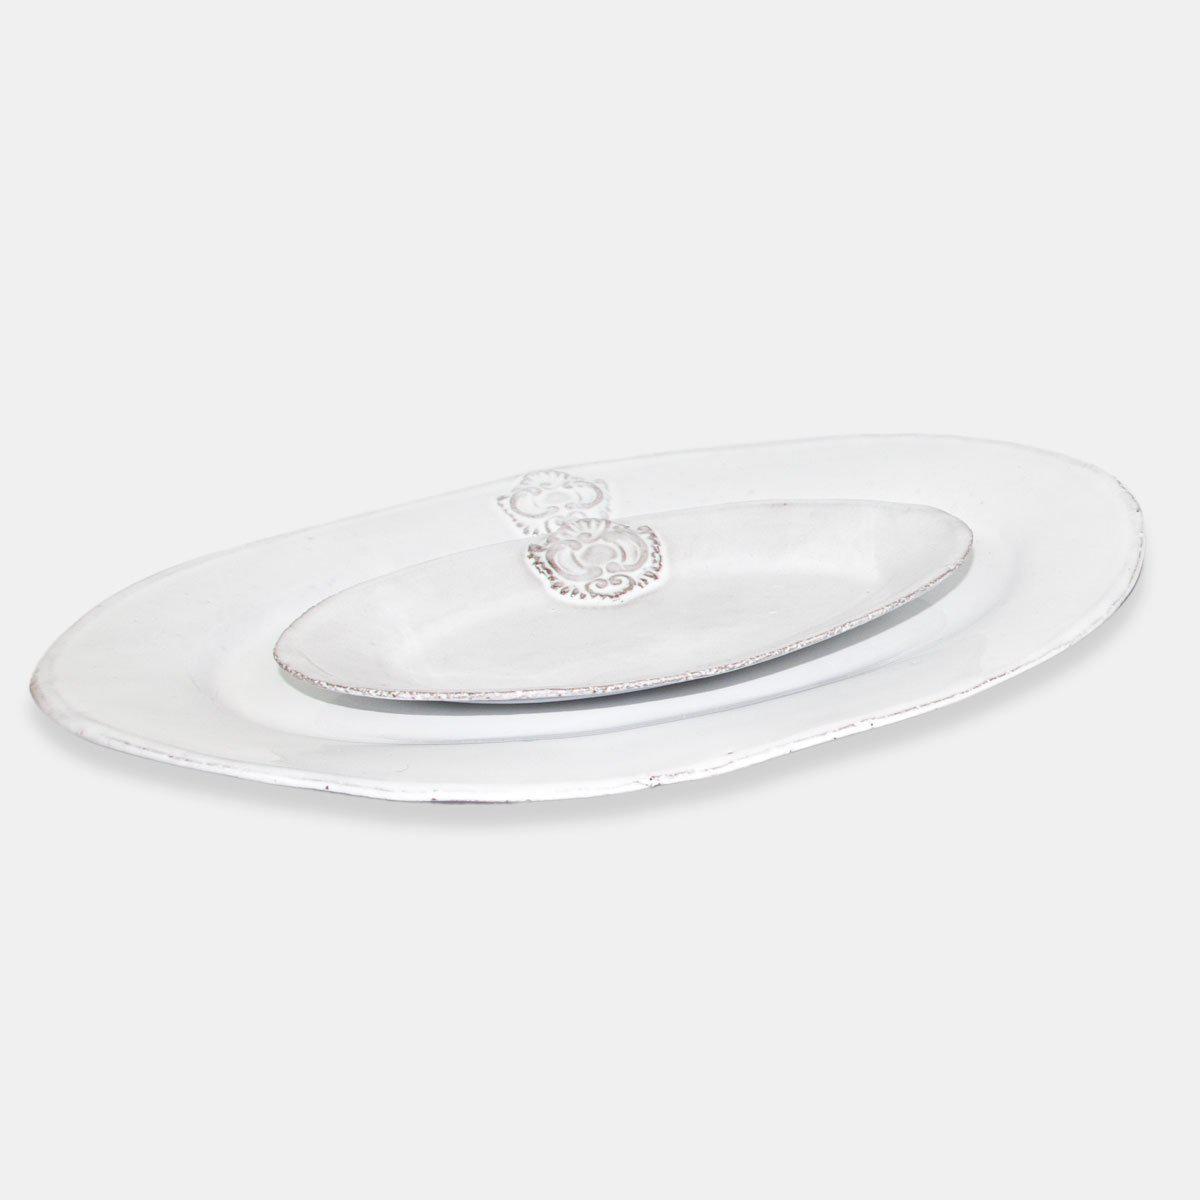 Charles oval platter-Handmade in France by CARRON